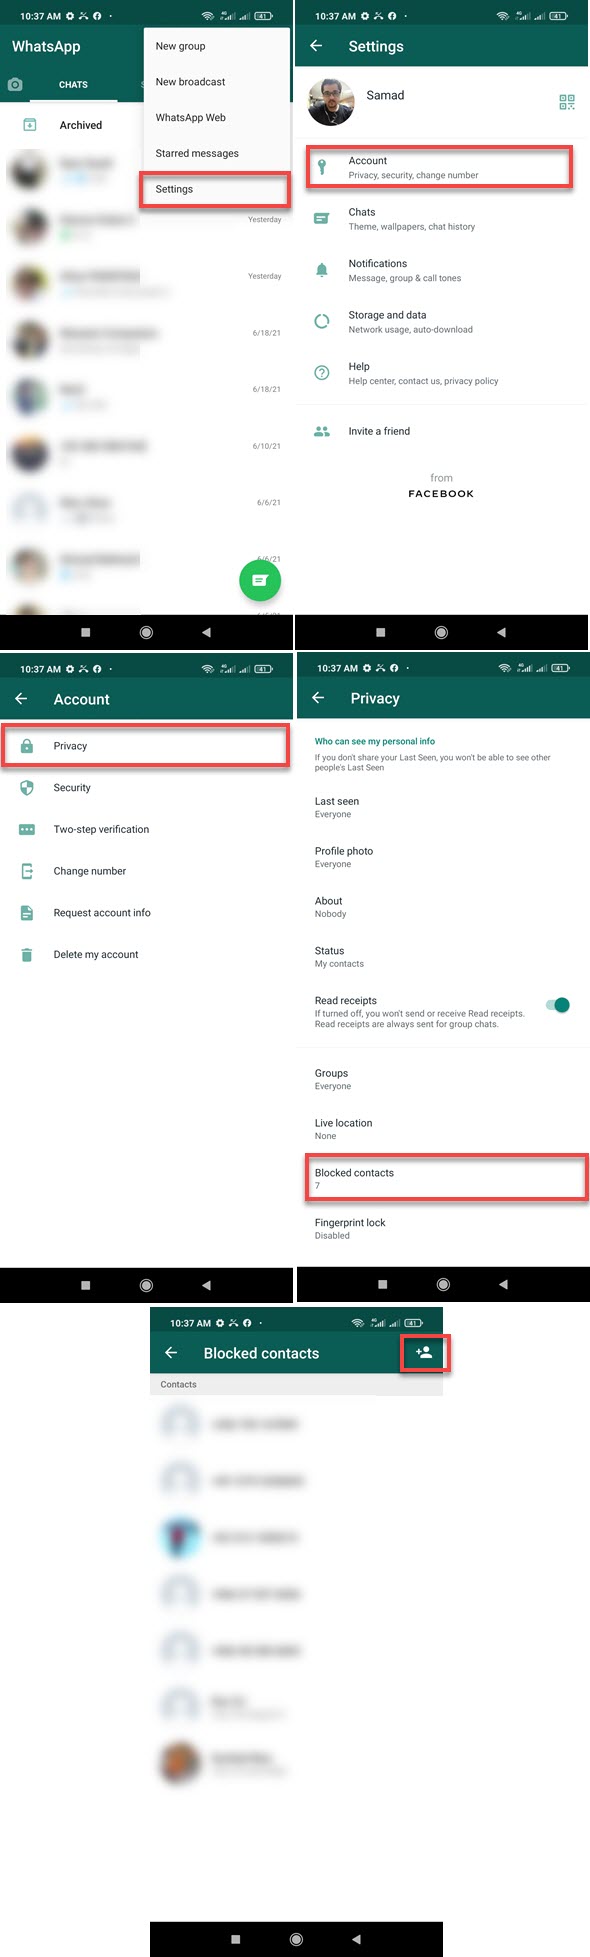 How to block contacts in WhatsApp on Android